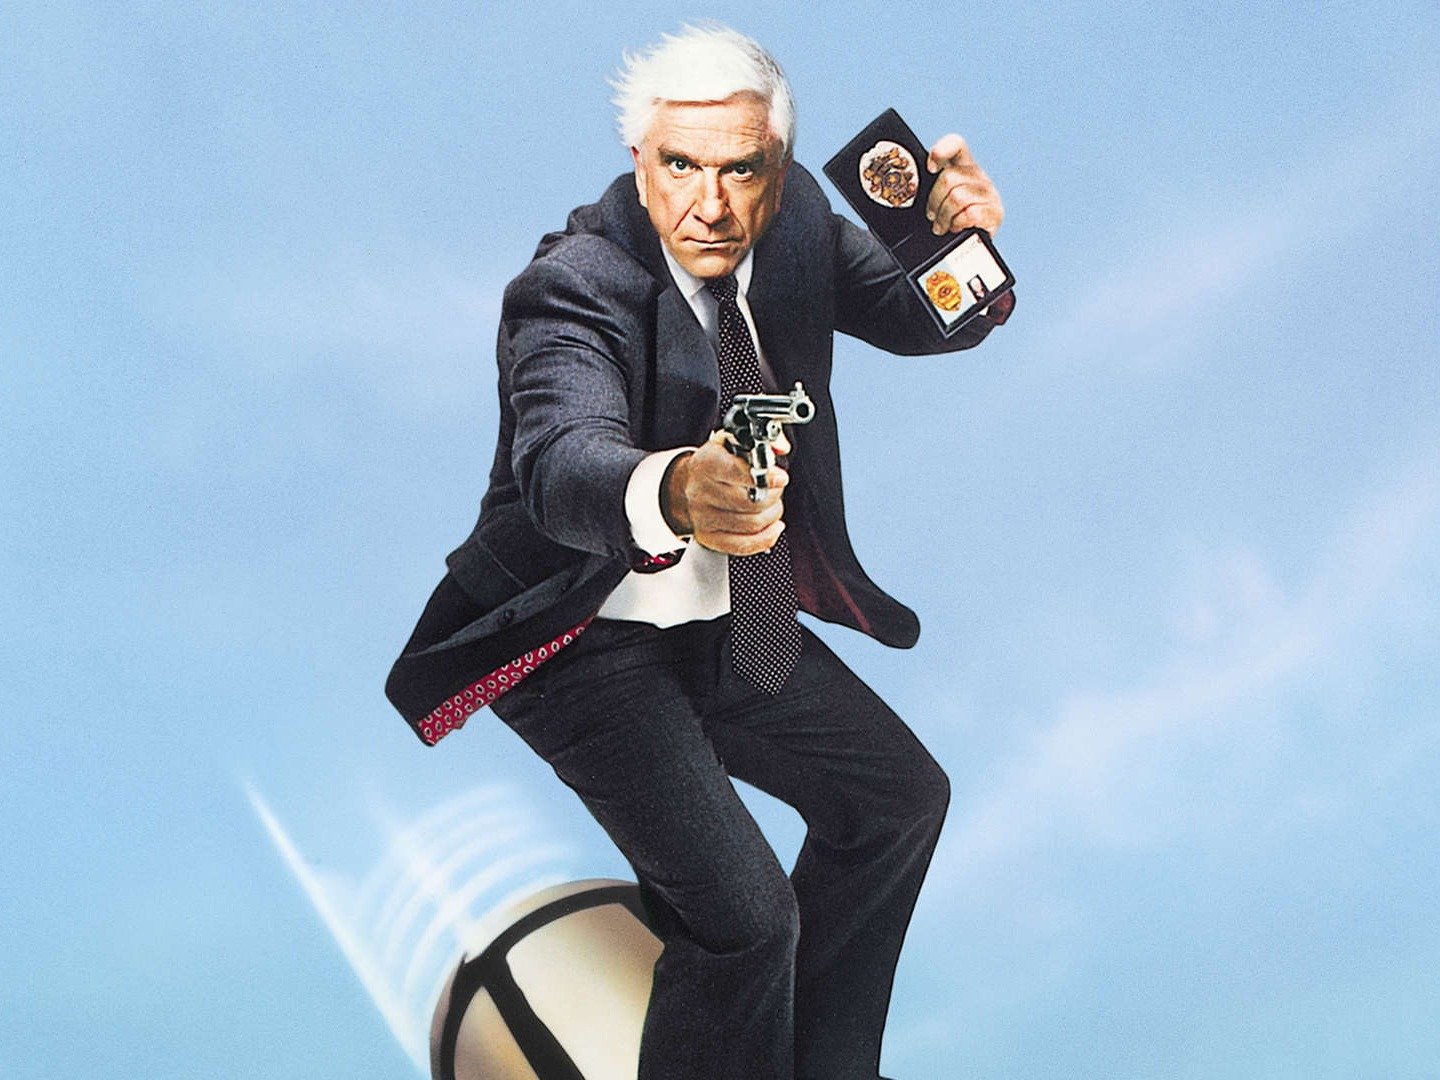 The Naked Gun Trailer Trailers Videos Rotten Tomatoes